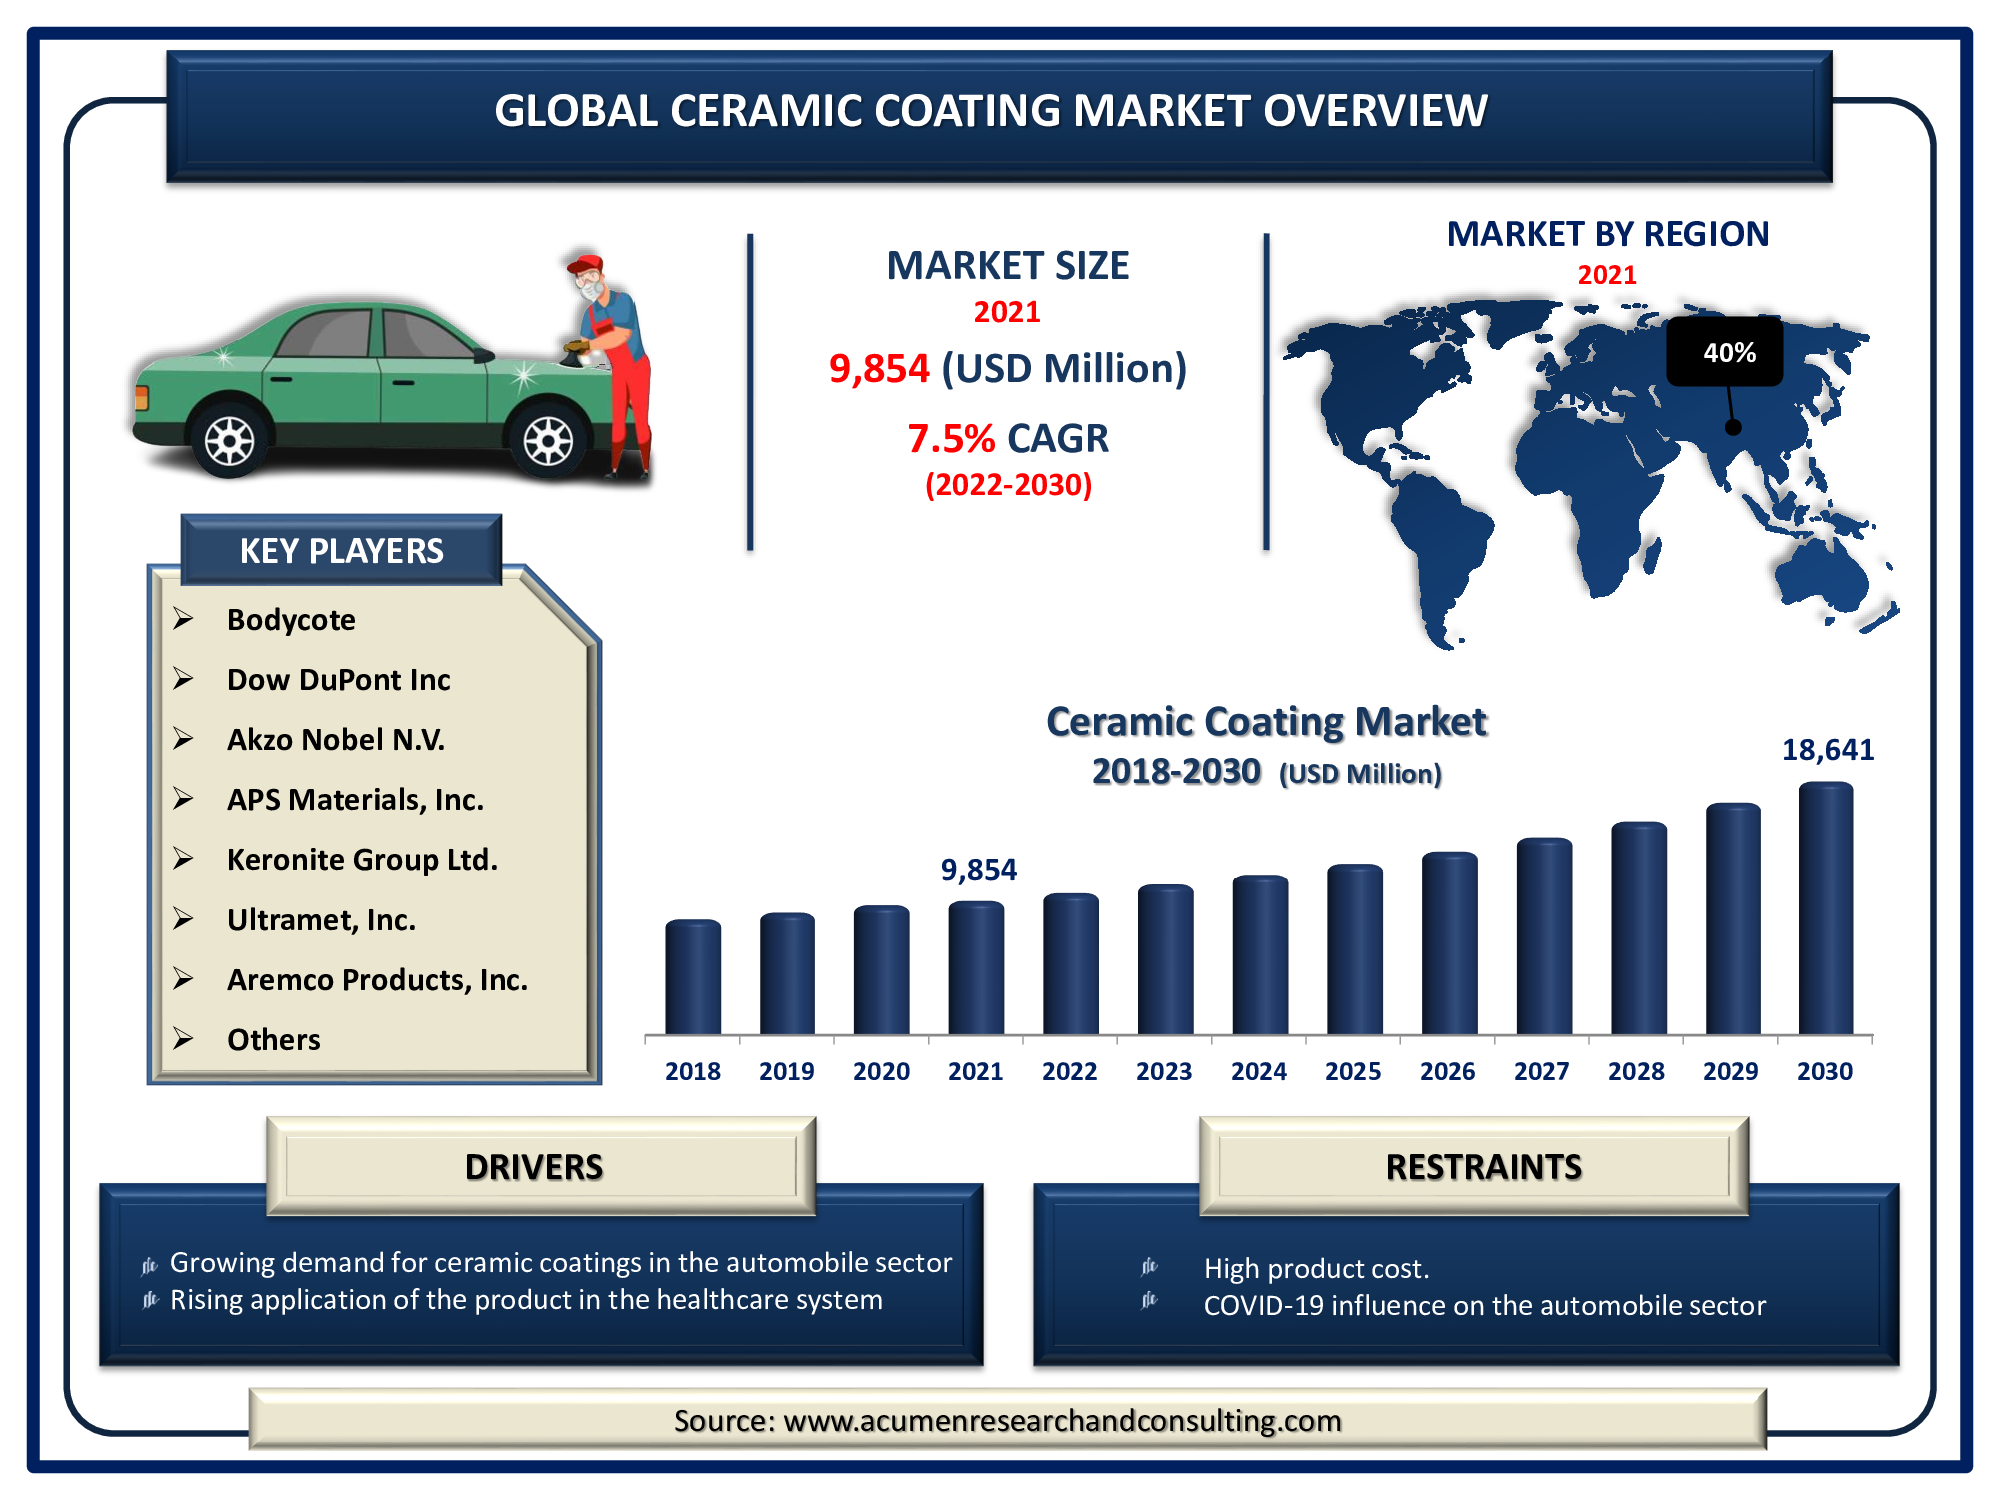 The Global Ceramic Coating Market Size Accounted for USD 9,854 Million in 2021 and is predicted to be worth USD 18,641 Million by 2030, with a CAGR of 7.5% during the forthcoming period from 2022 to 2030.